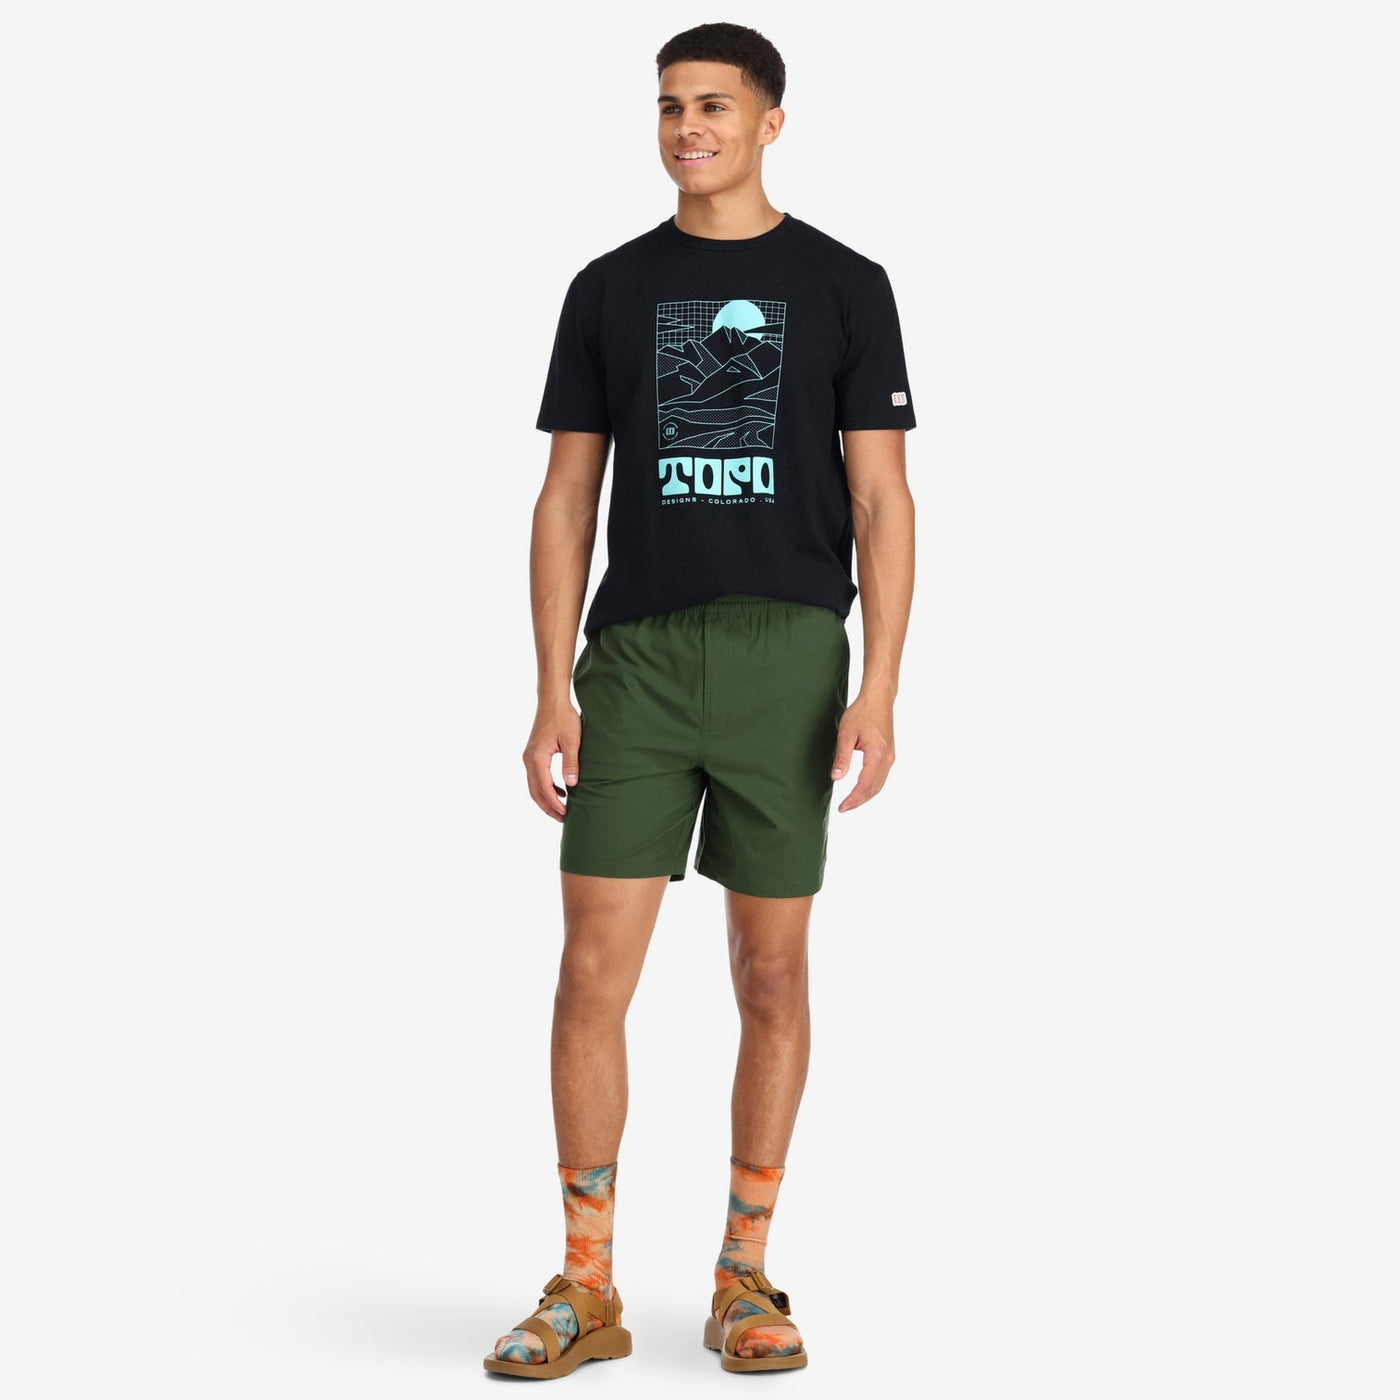 Men's Tech Shorts Lightweight - The Lake and Company